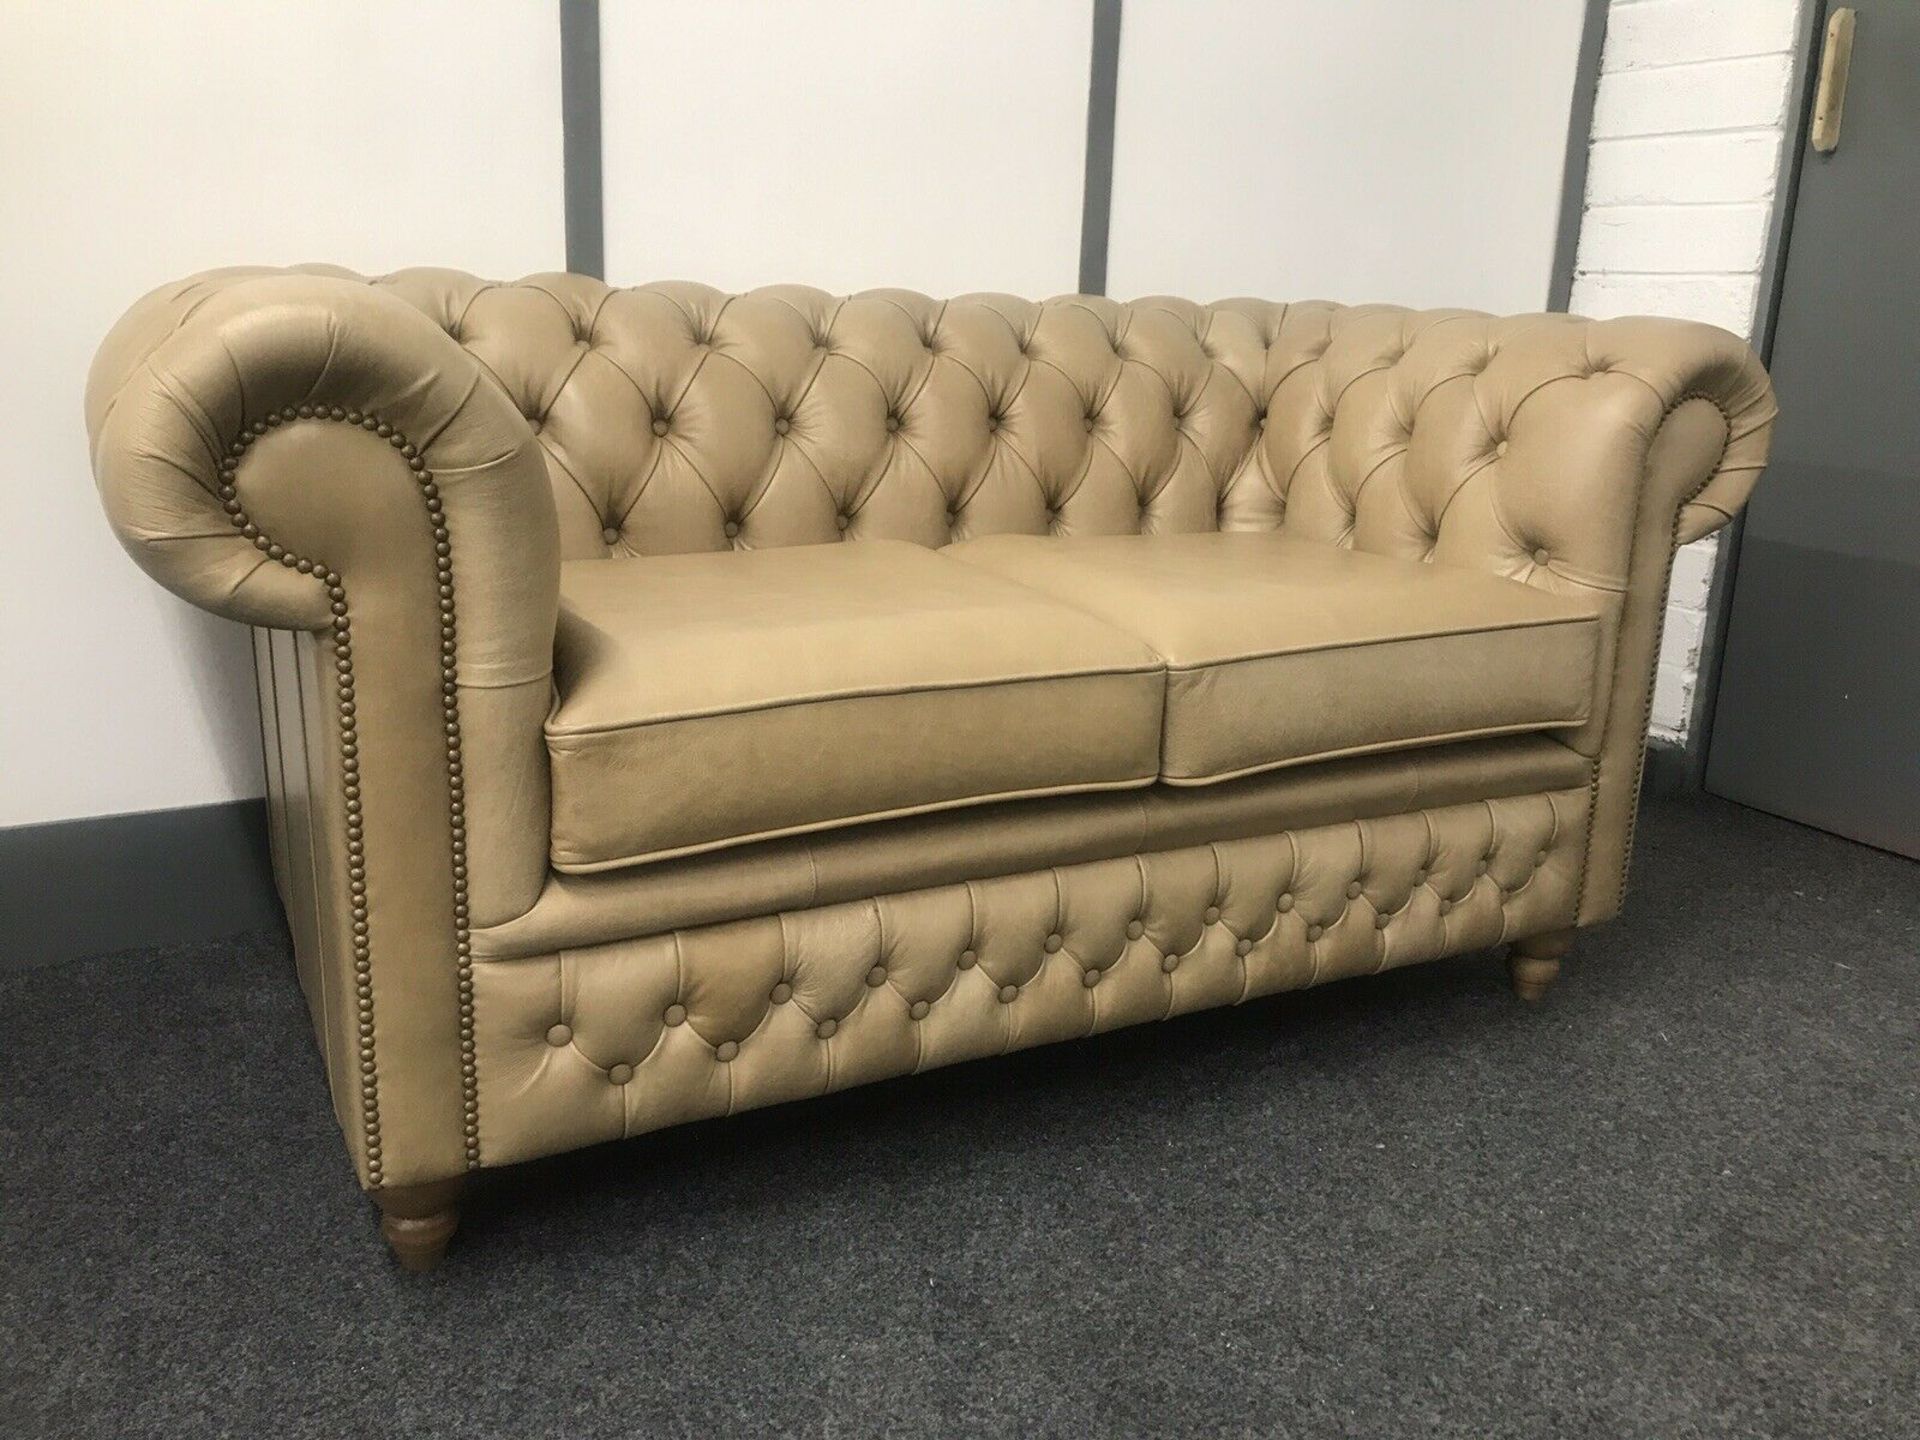 Charlton 2 Seater Leather Chesterfield Sand Aniline Leather A Traditional Classic Sofa That Will